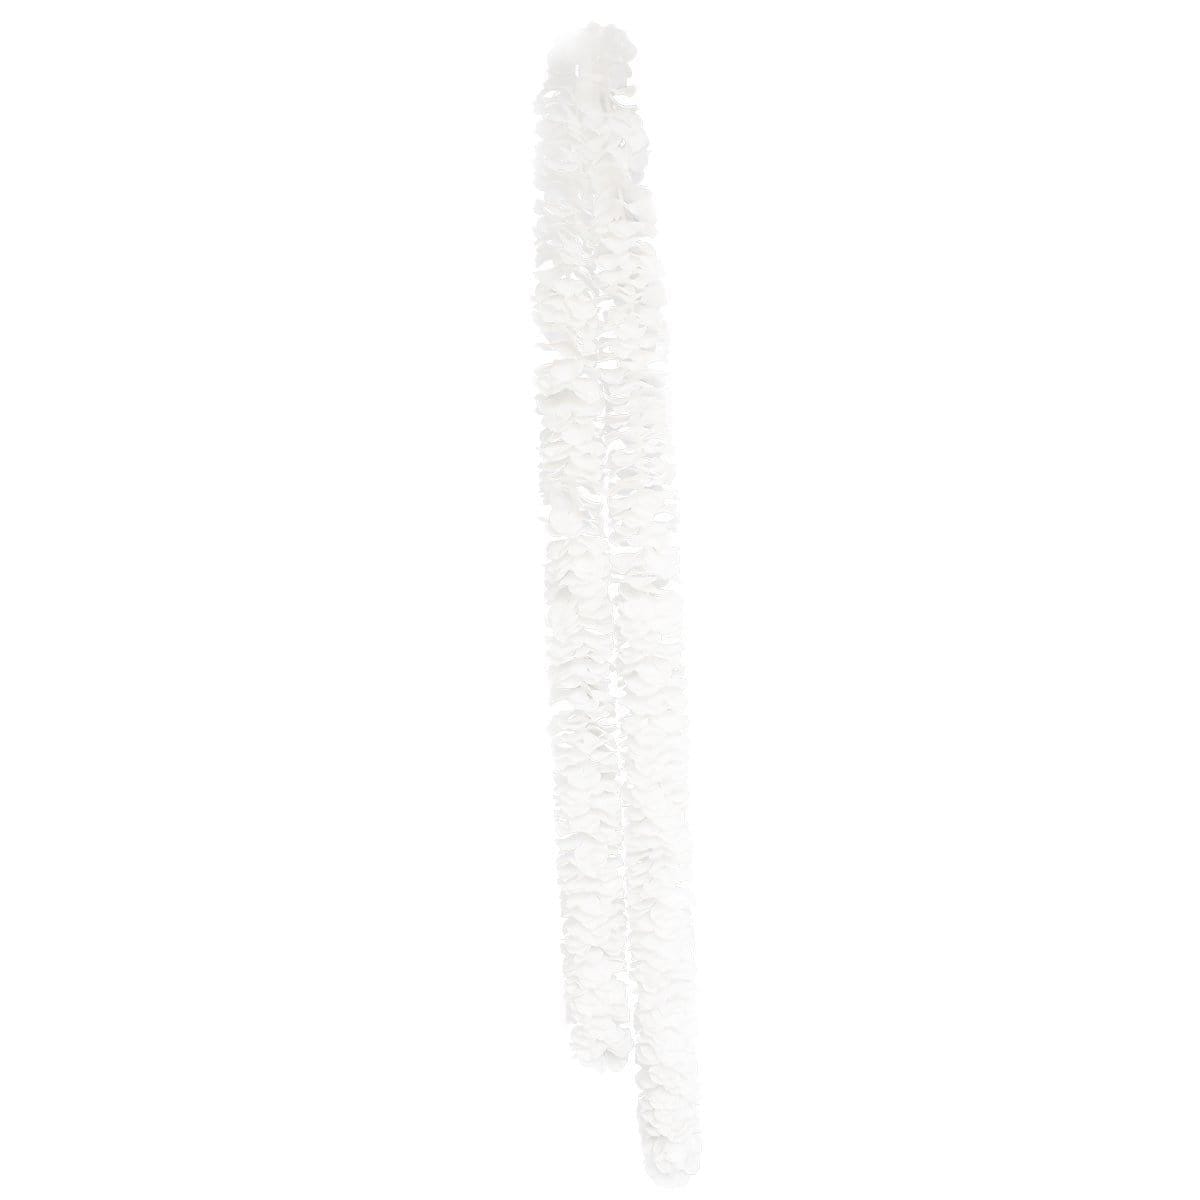 Buy Theme Party White Pastel Flower Garland, 7 Feet sold at Party Expert